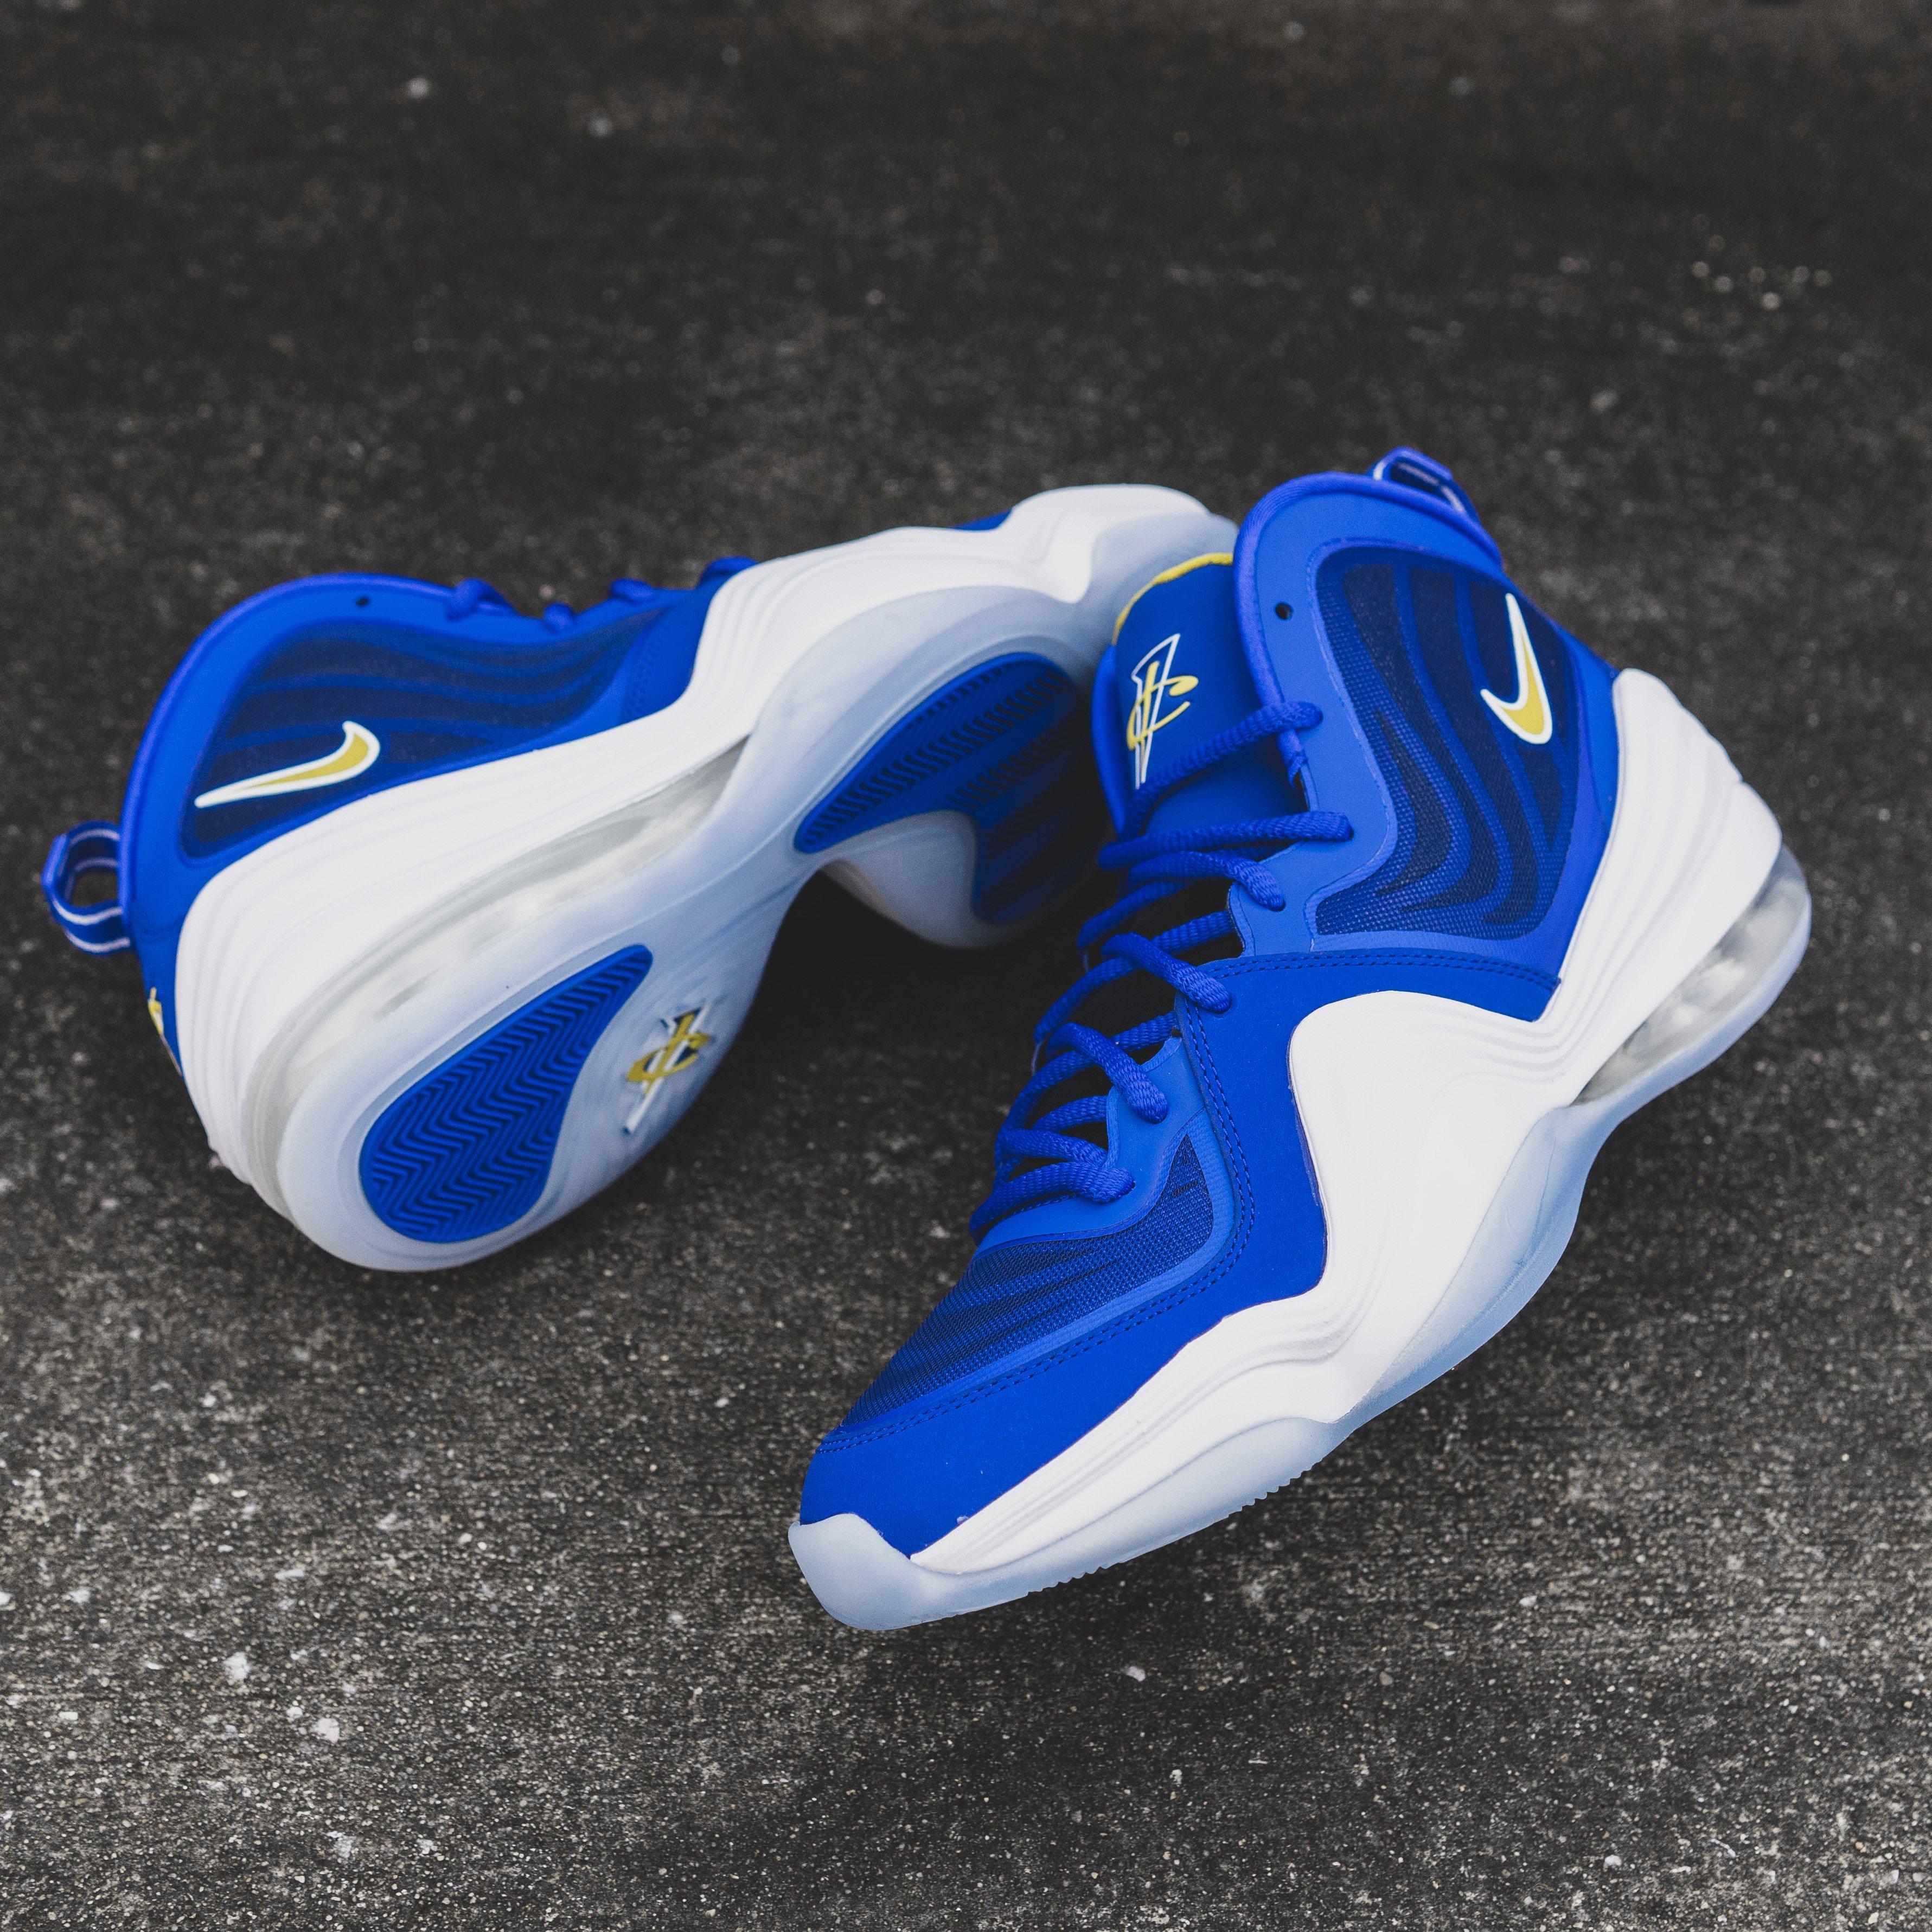 Sneakers Release – Nike Air Penny V 